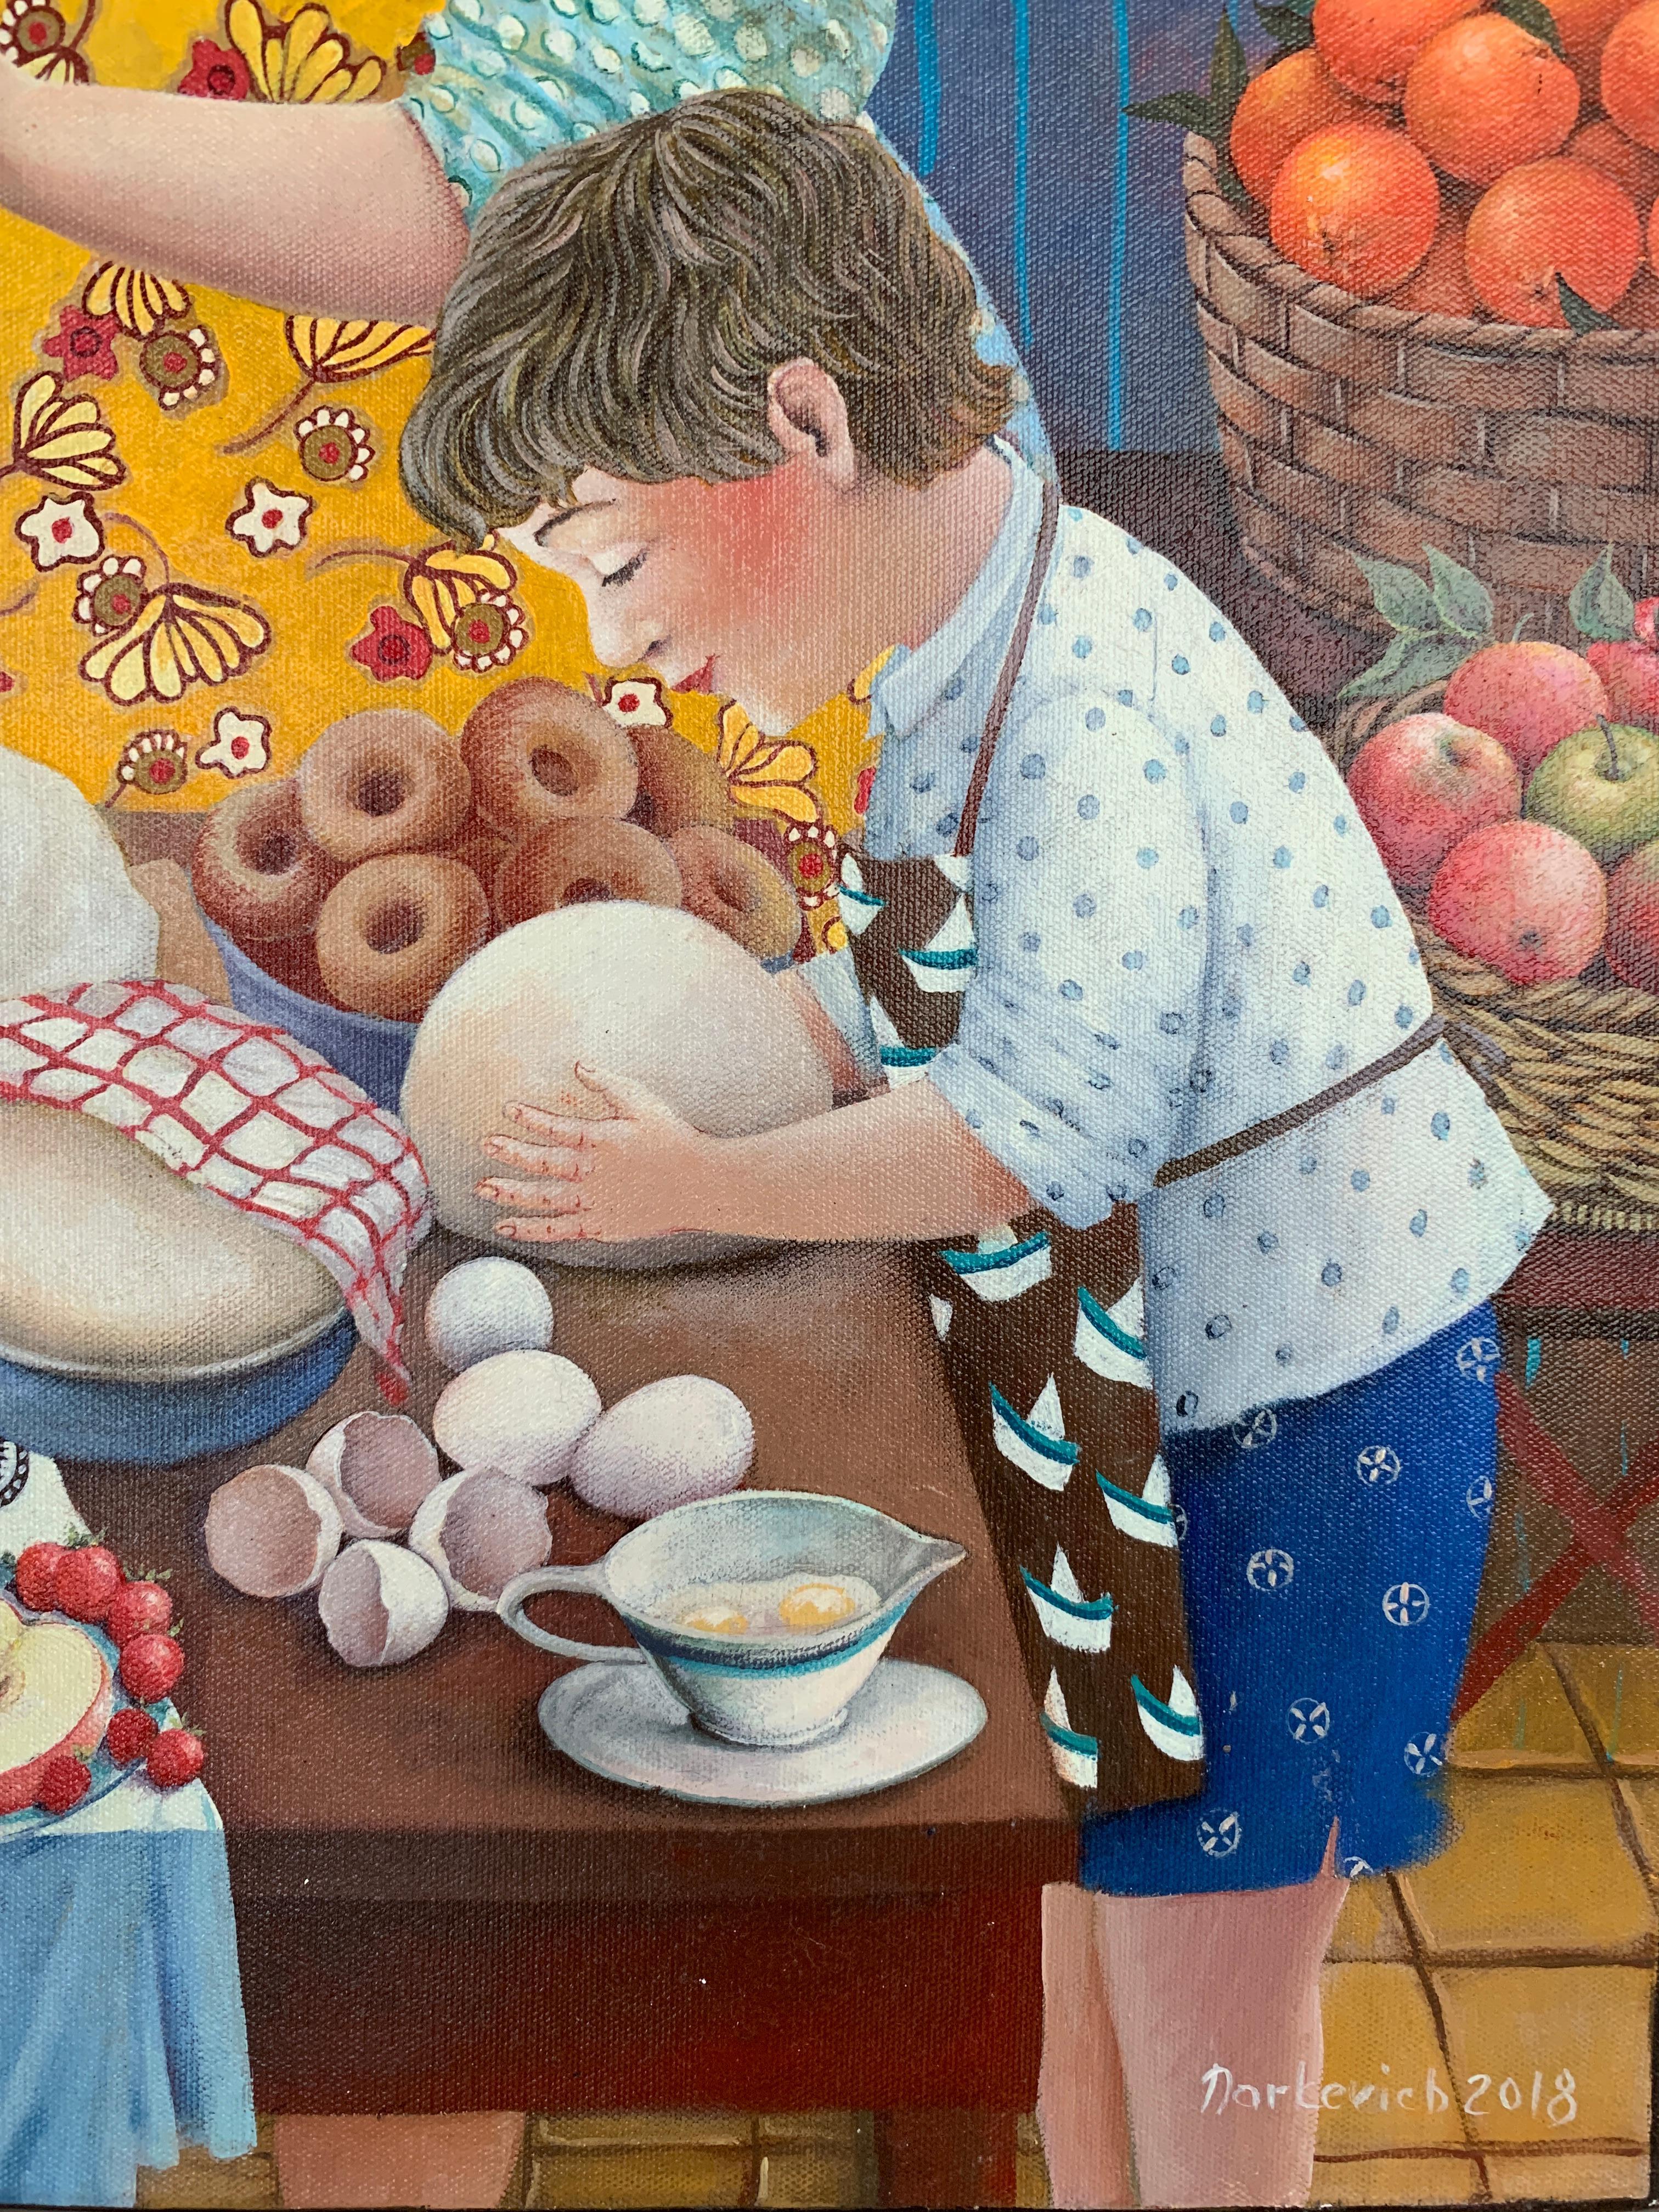 Morning smells-morning routine of baking the bread and pastry - Painting by Elena Narkevich